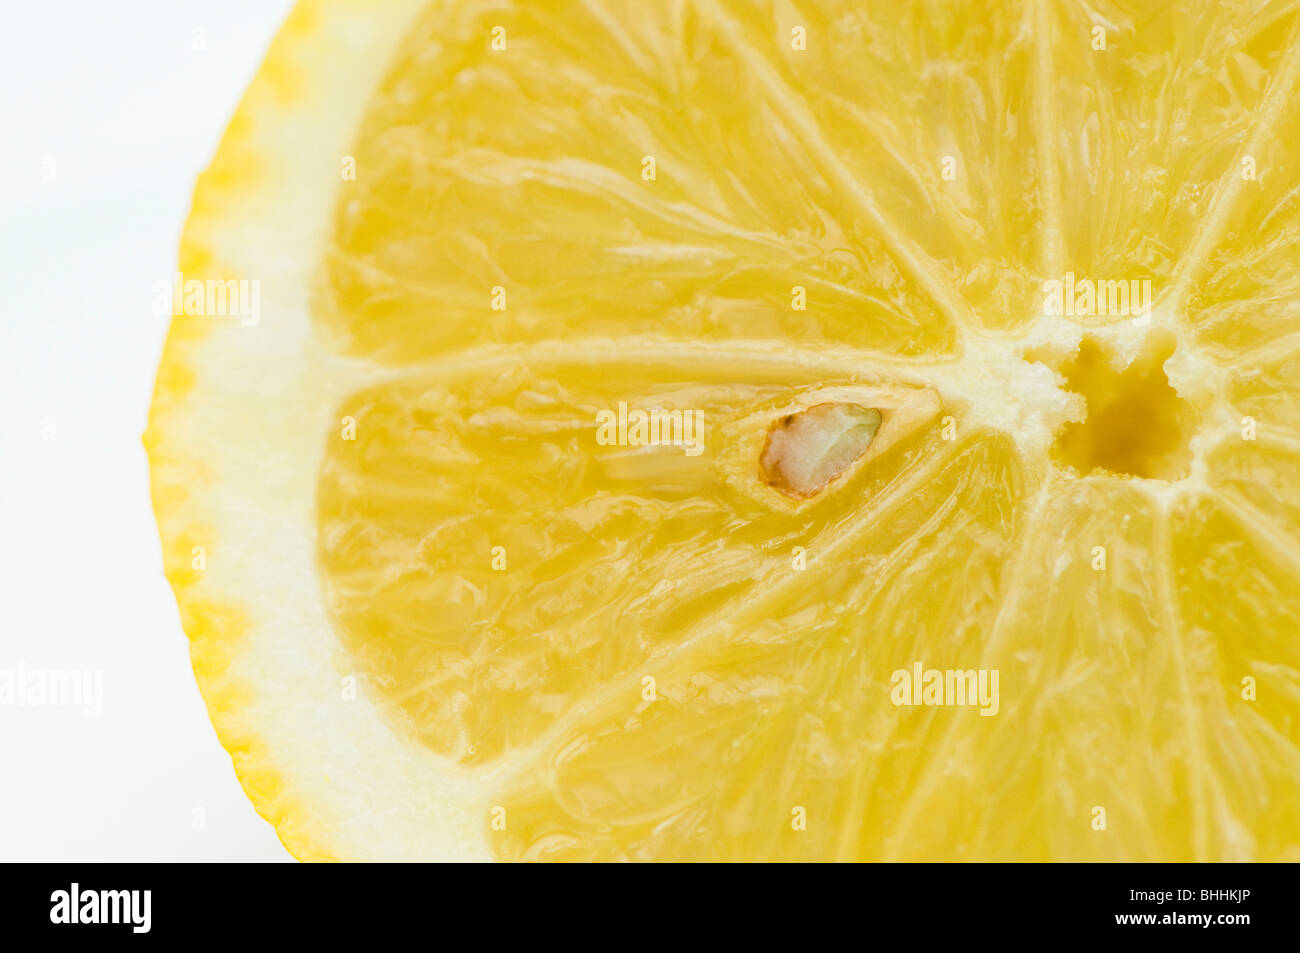 Close up of the inside of a lemon Stock Photo